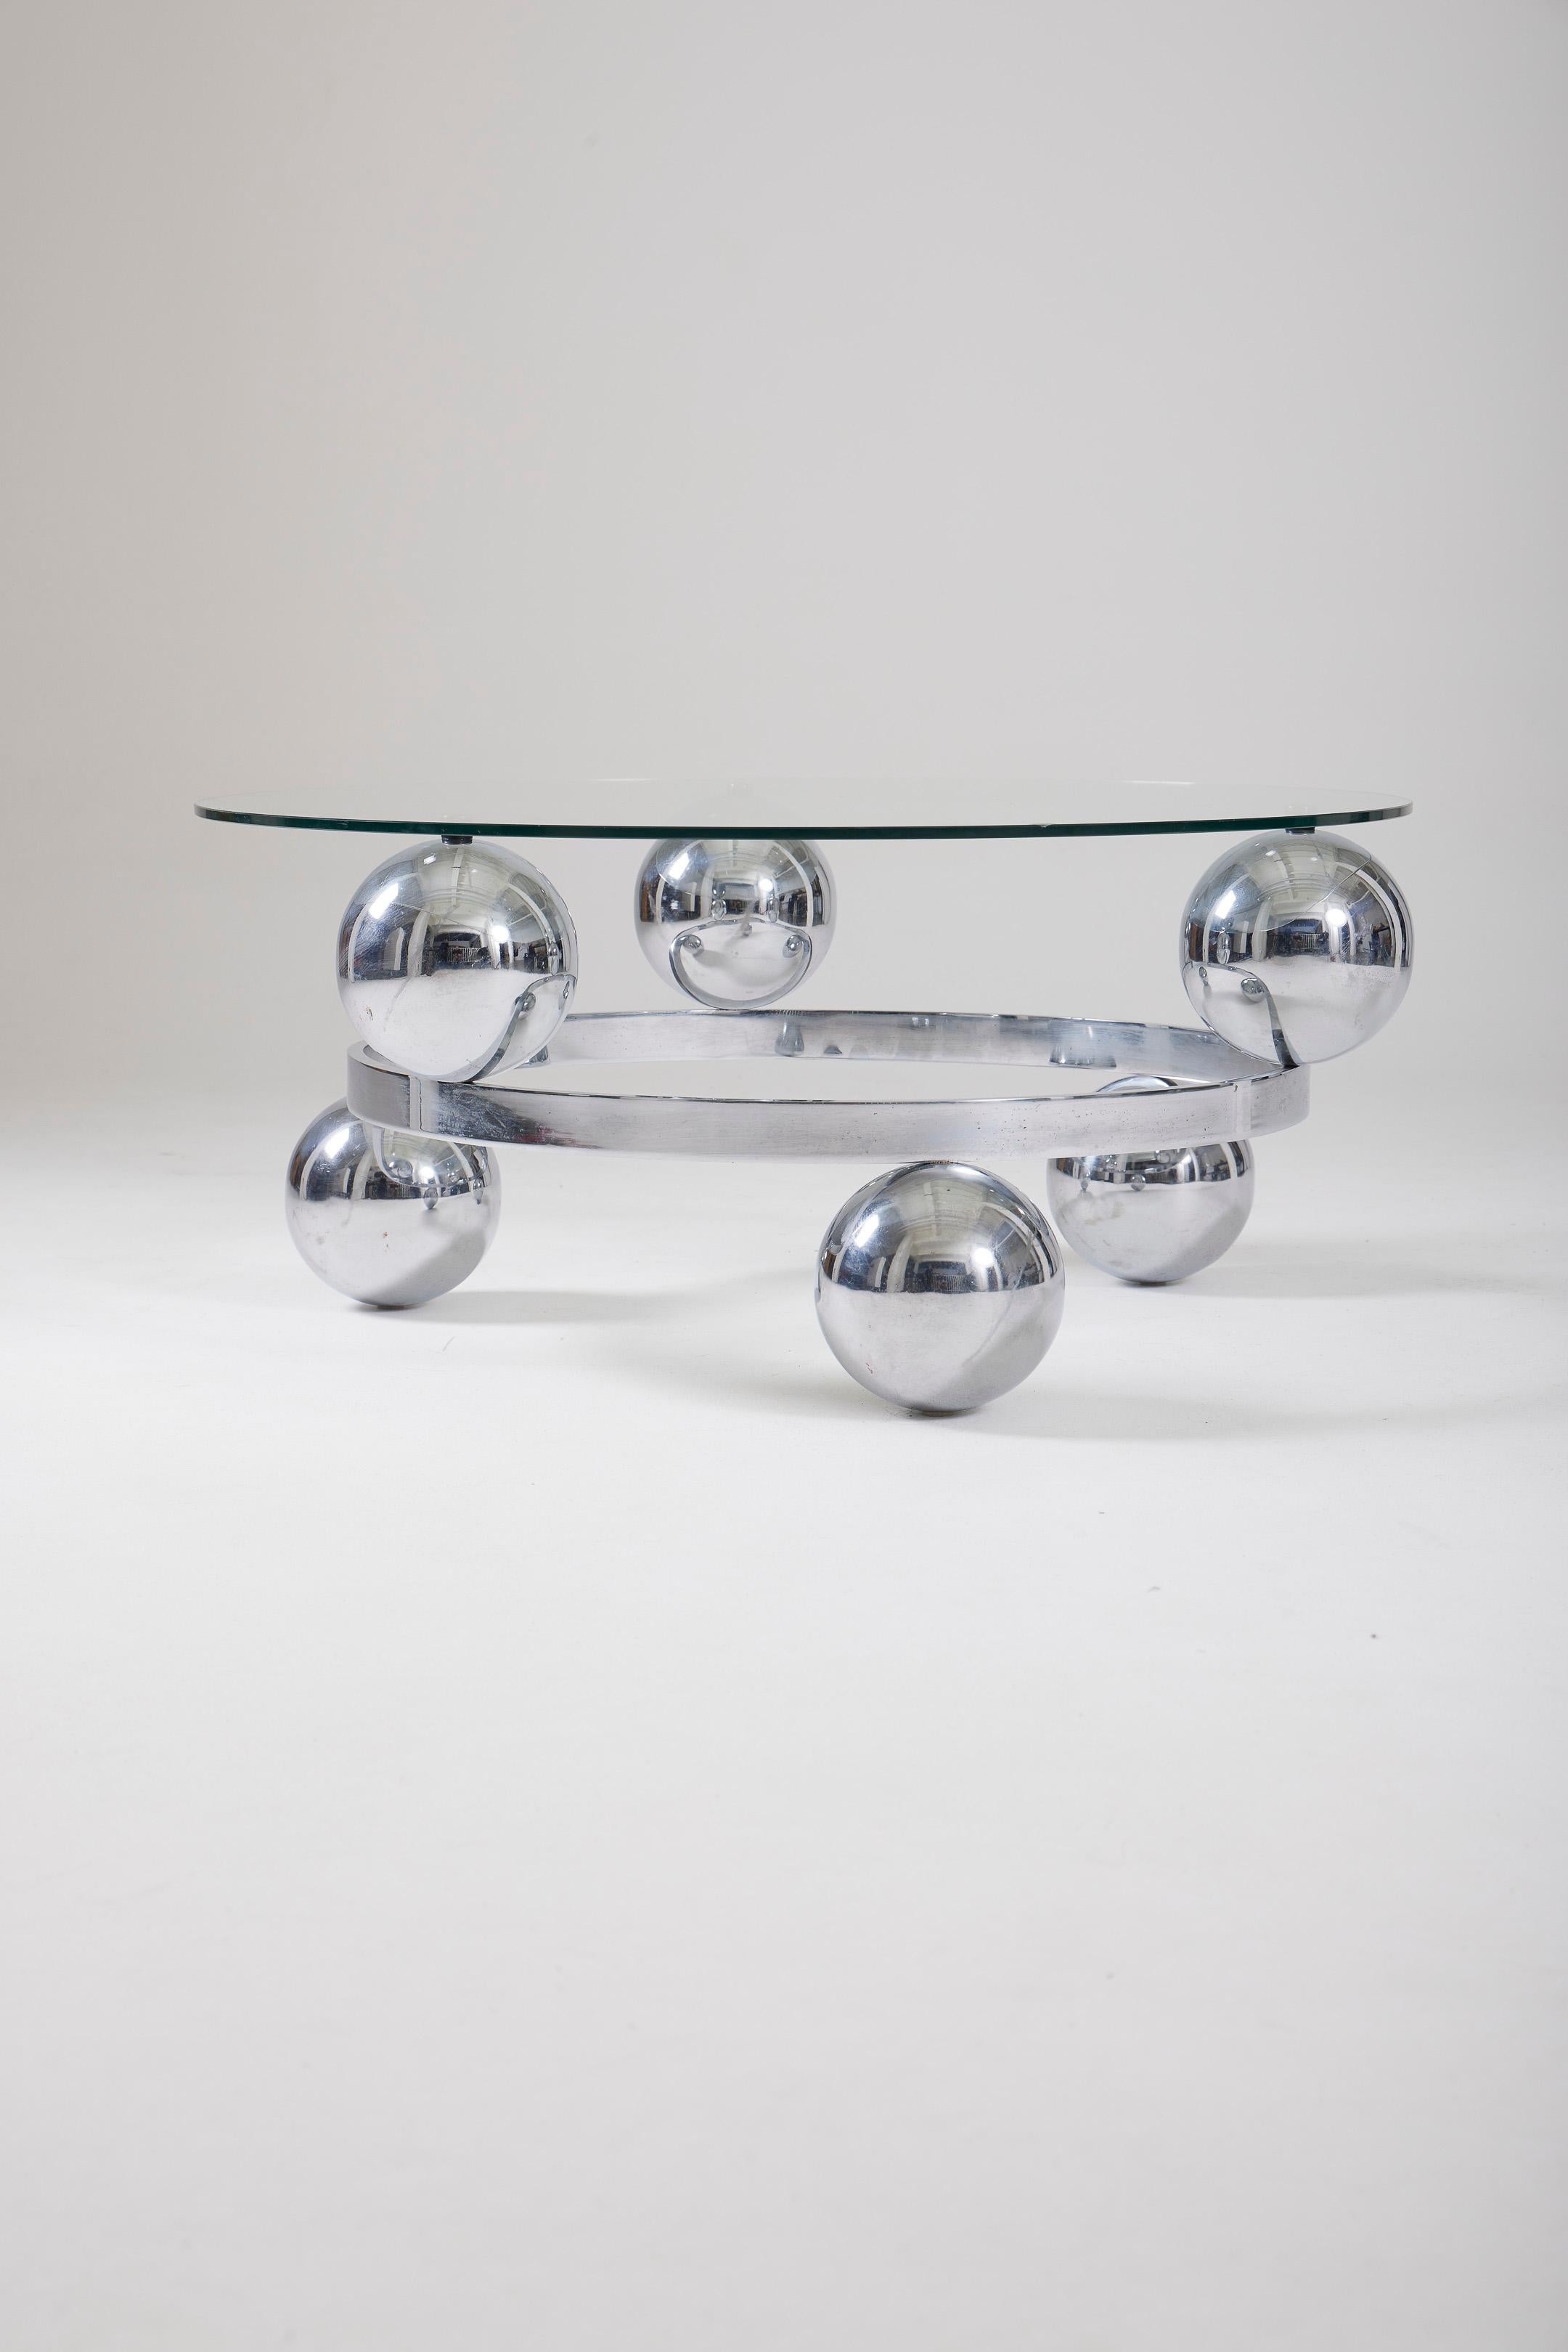 Contemporary Space Age glass coffee table